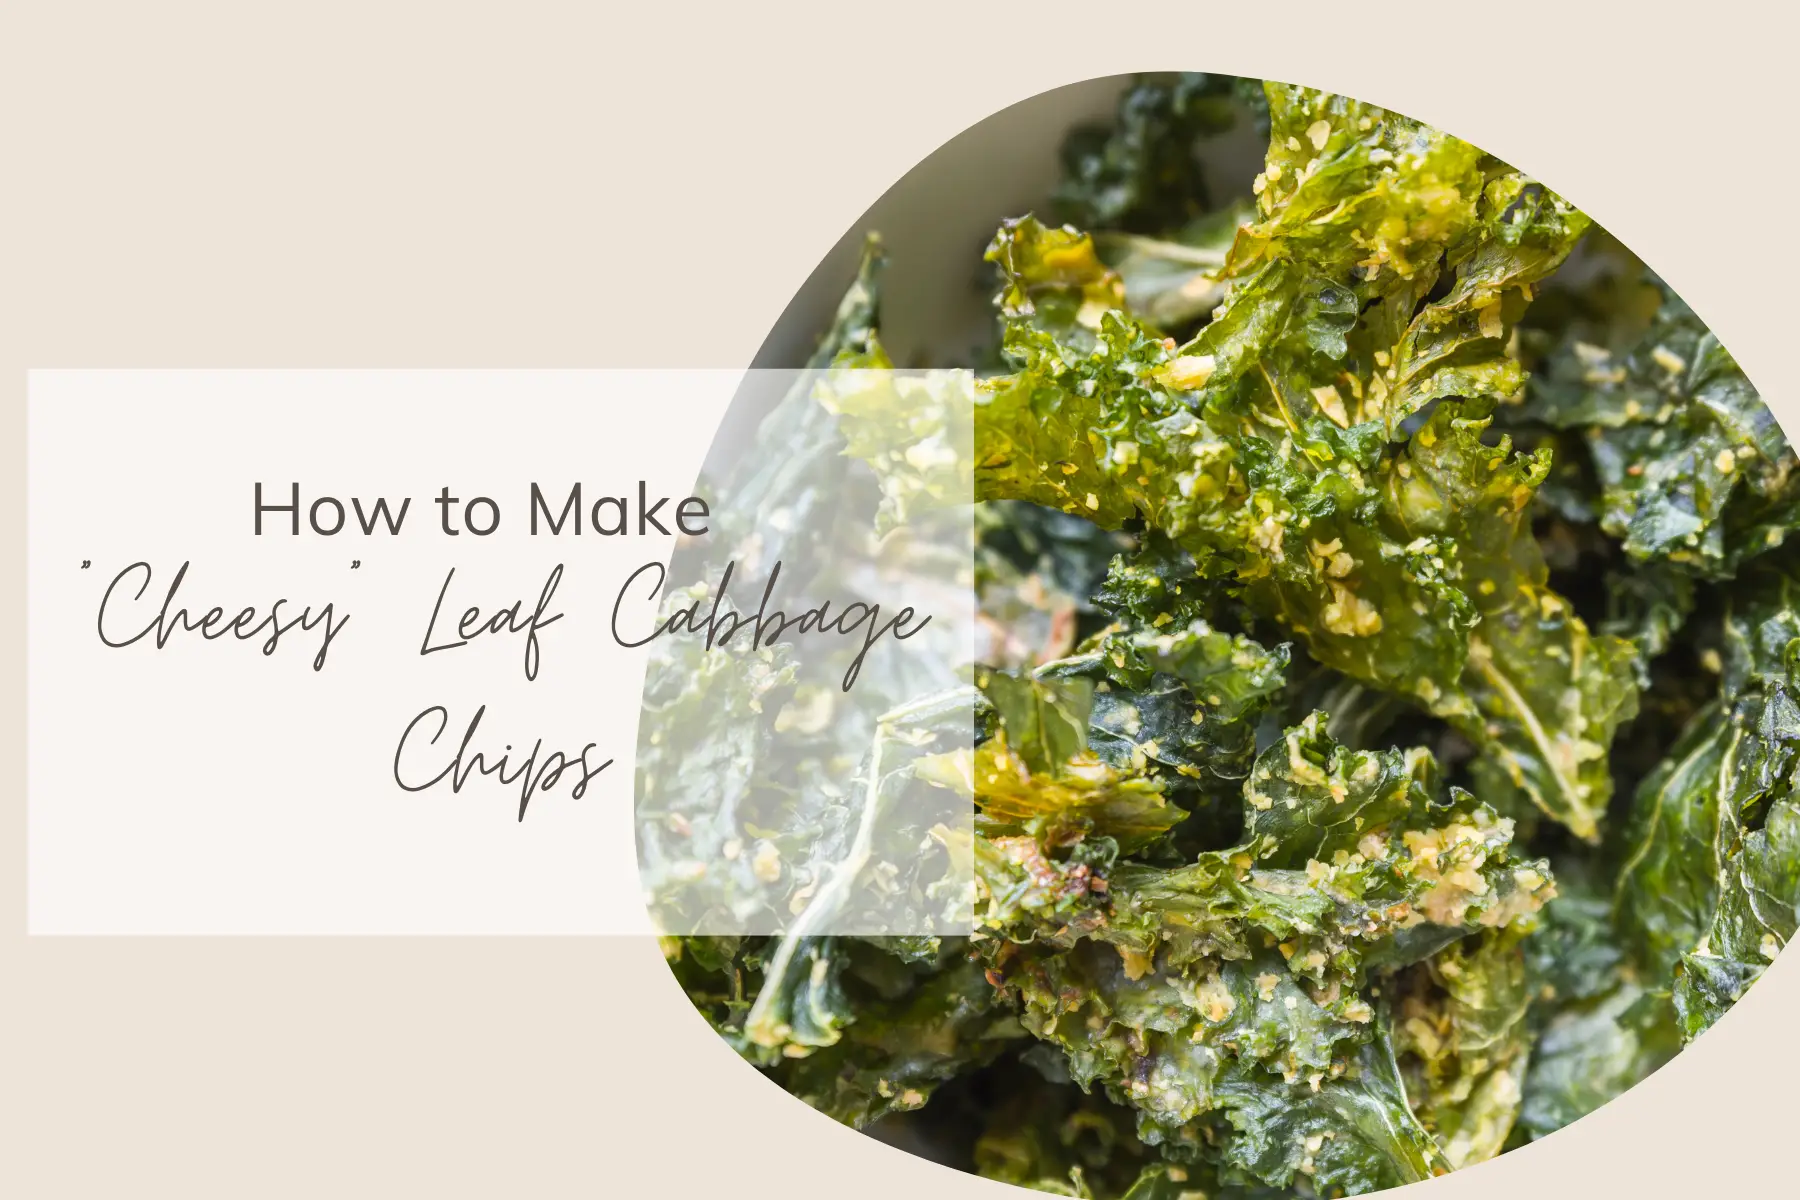 How to Make “Cheesy” Leaf Cabbage Chips